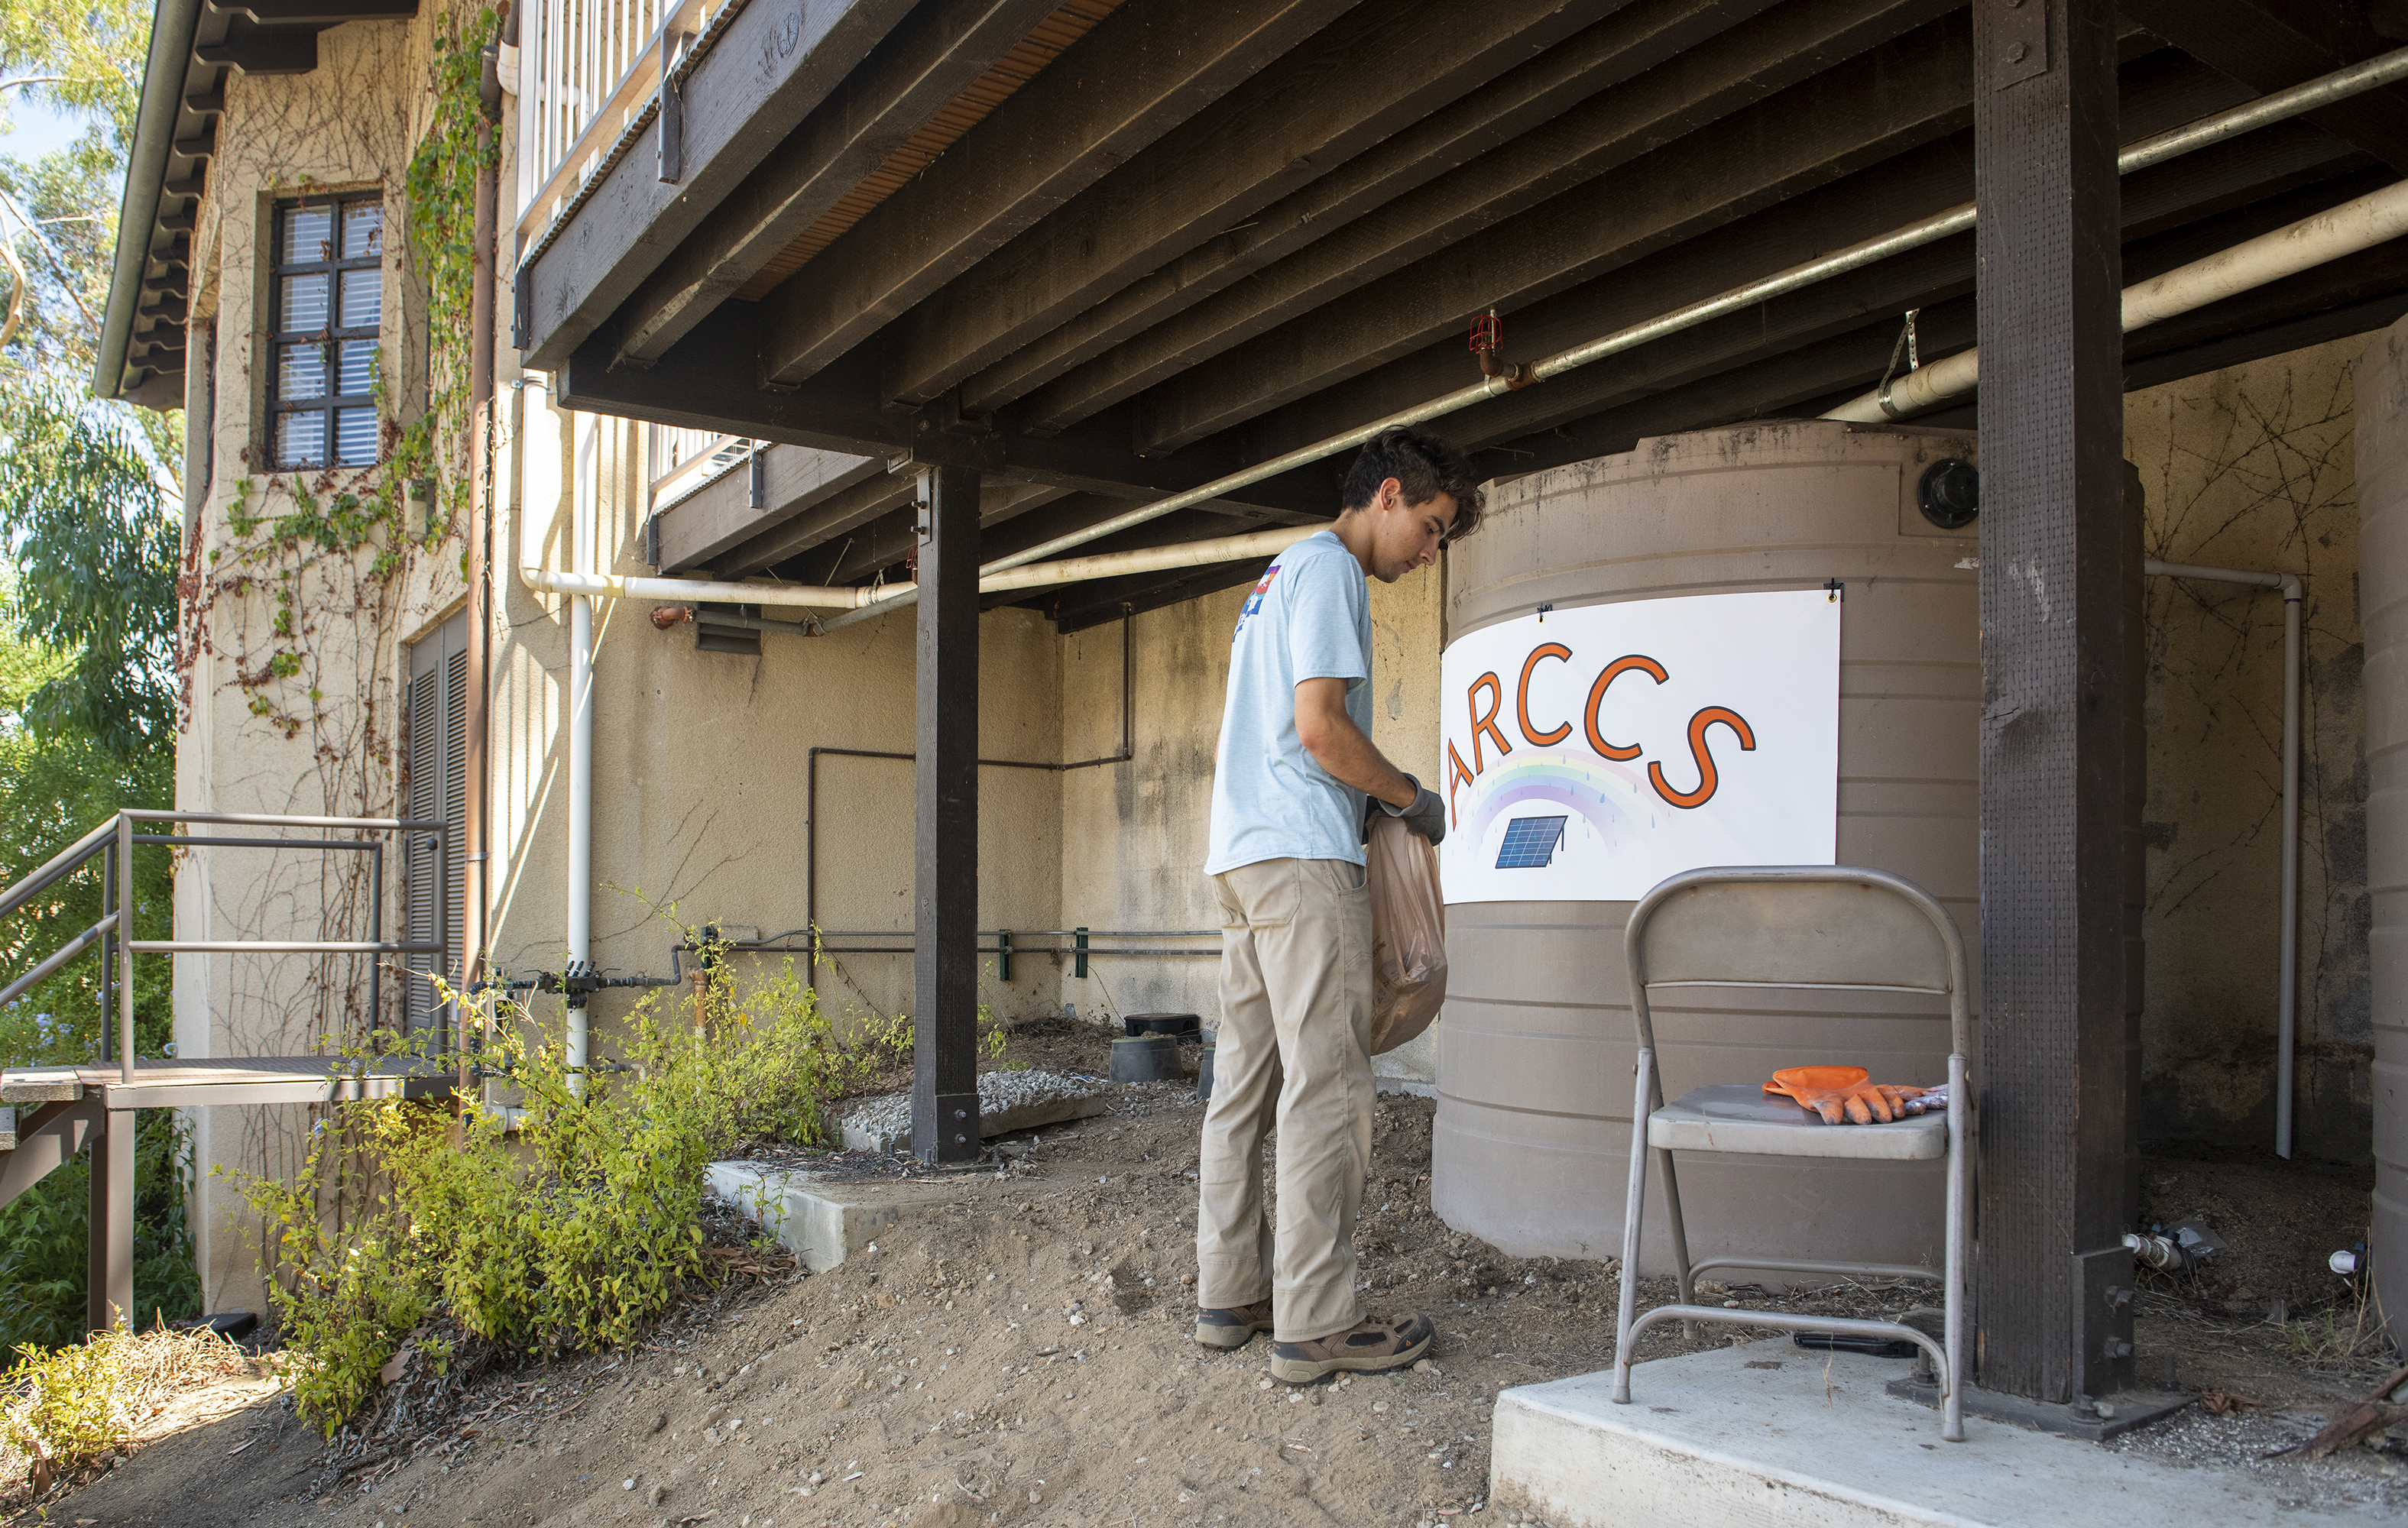 Occidental's ARCCS (A Rain­water Collection and Cleaning System).